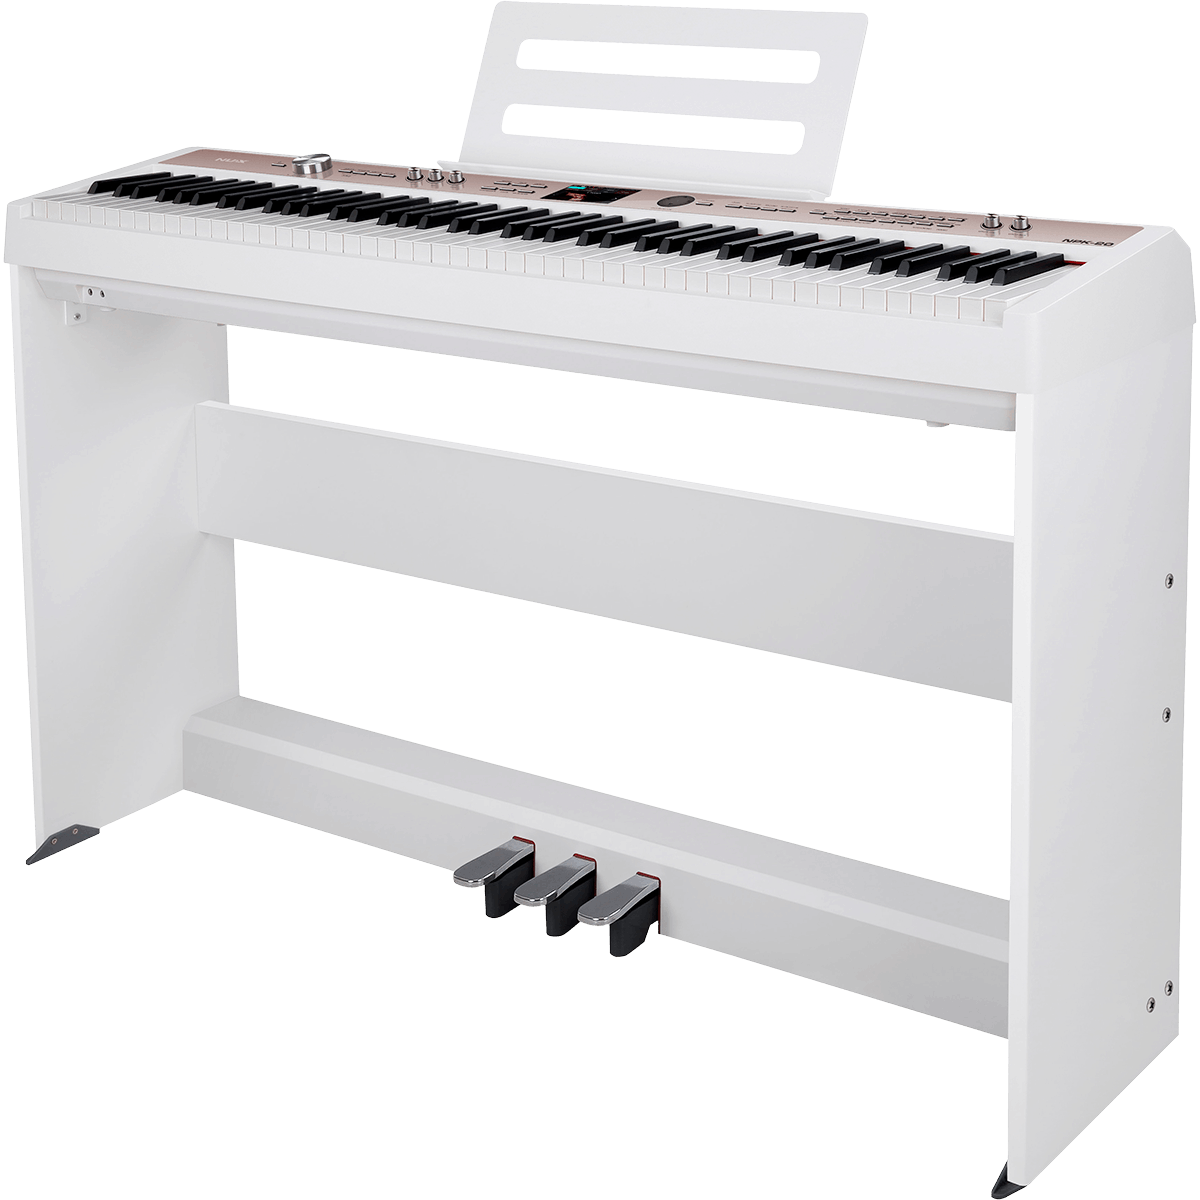 Packs Claviers et Synthé - NUX - Pack NPK-20 (BLANC) + Stand...